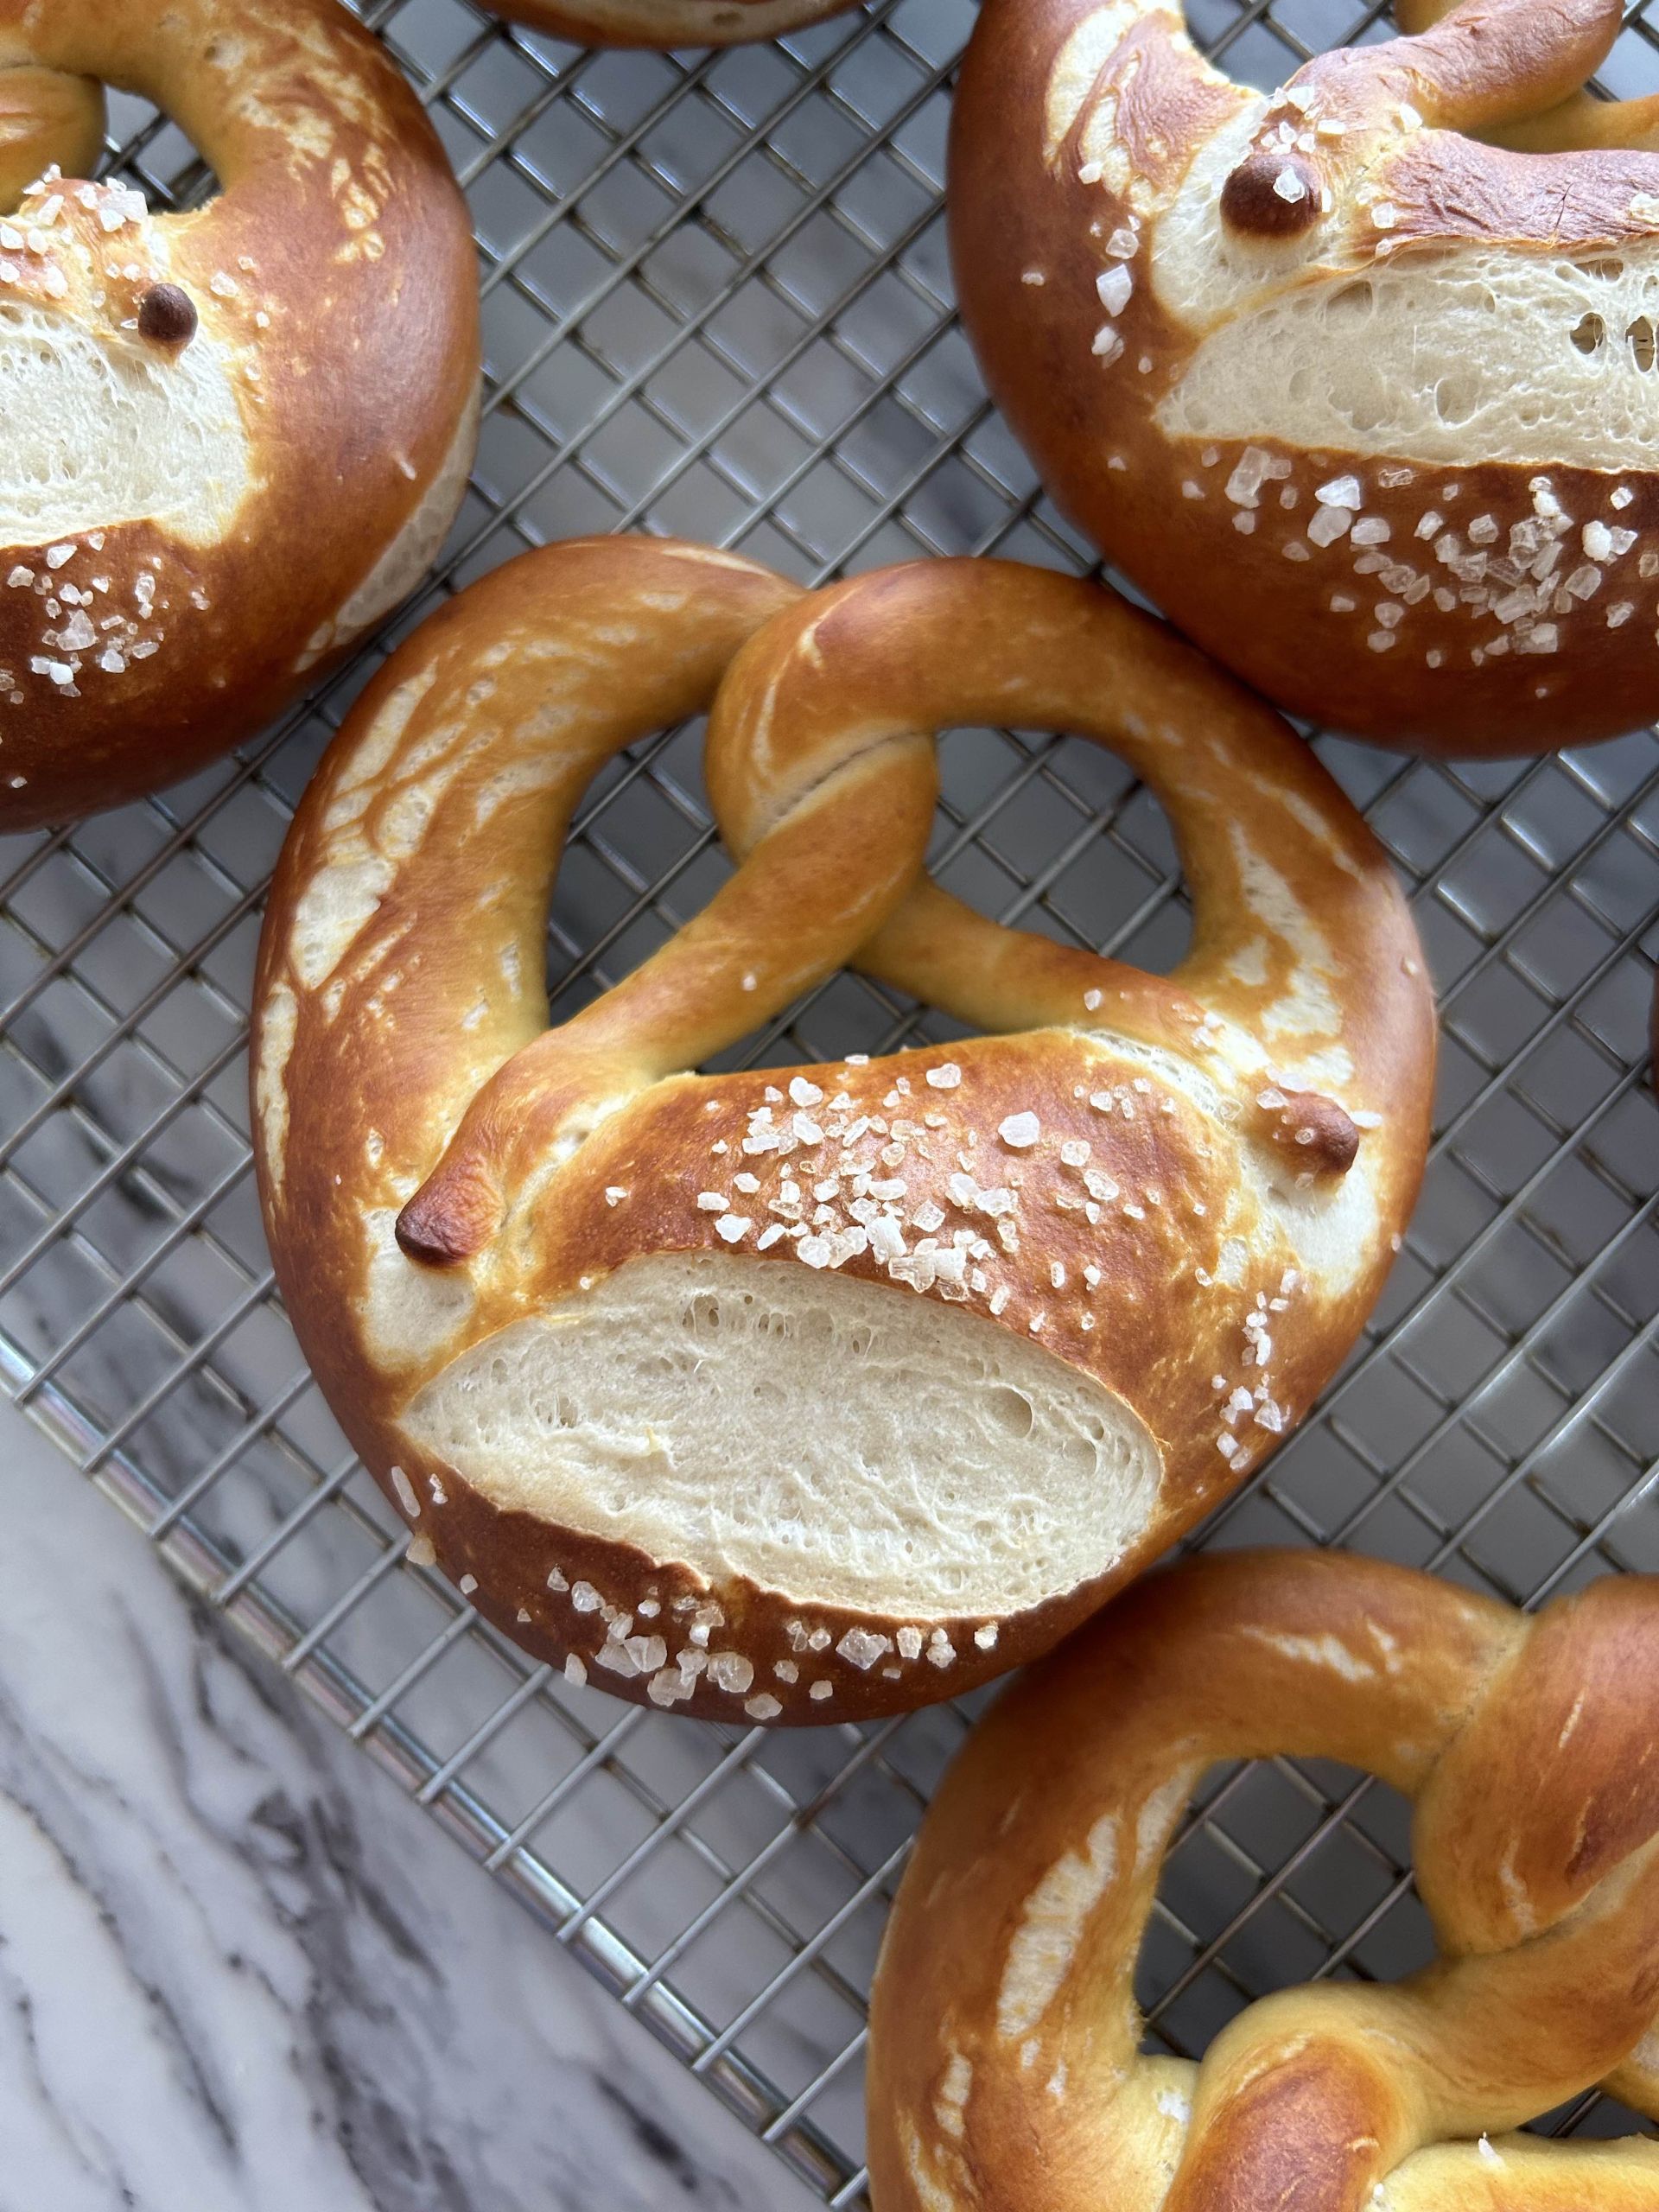 Close up of one deep brown german schwabisch style pretzel cooling on a wire rack with other pretzels around it.